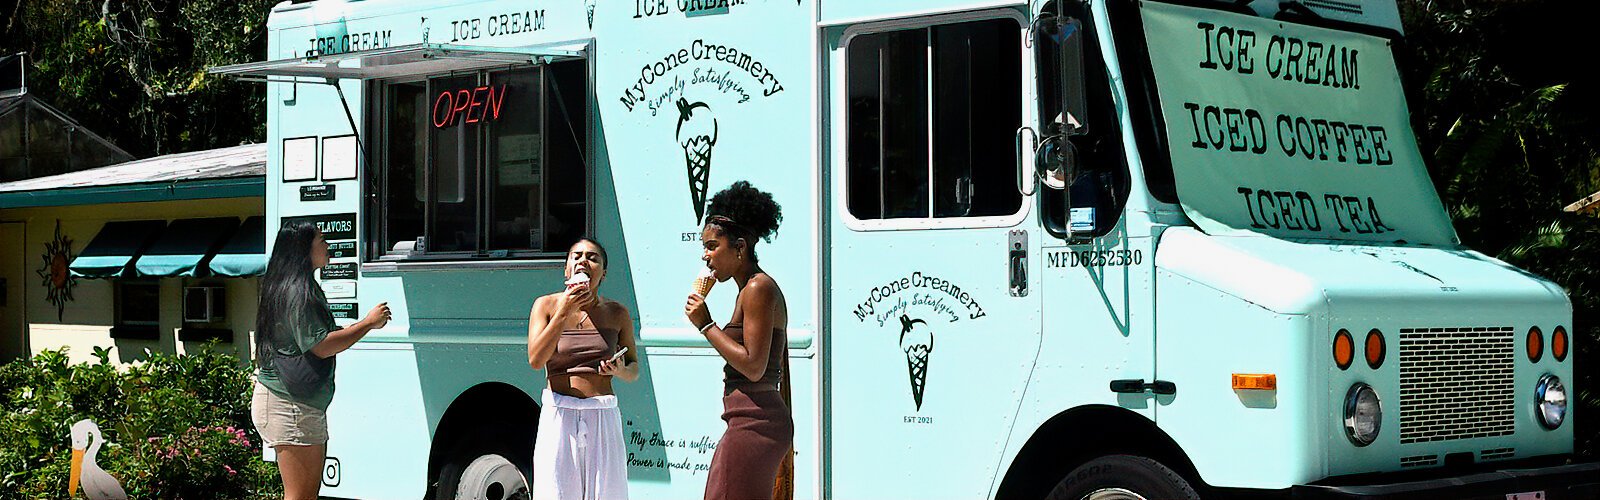 The sweltering heat made the iced sweet treats of My Cone Creamery food truck much appreciated by the plant market goers.